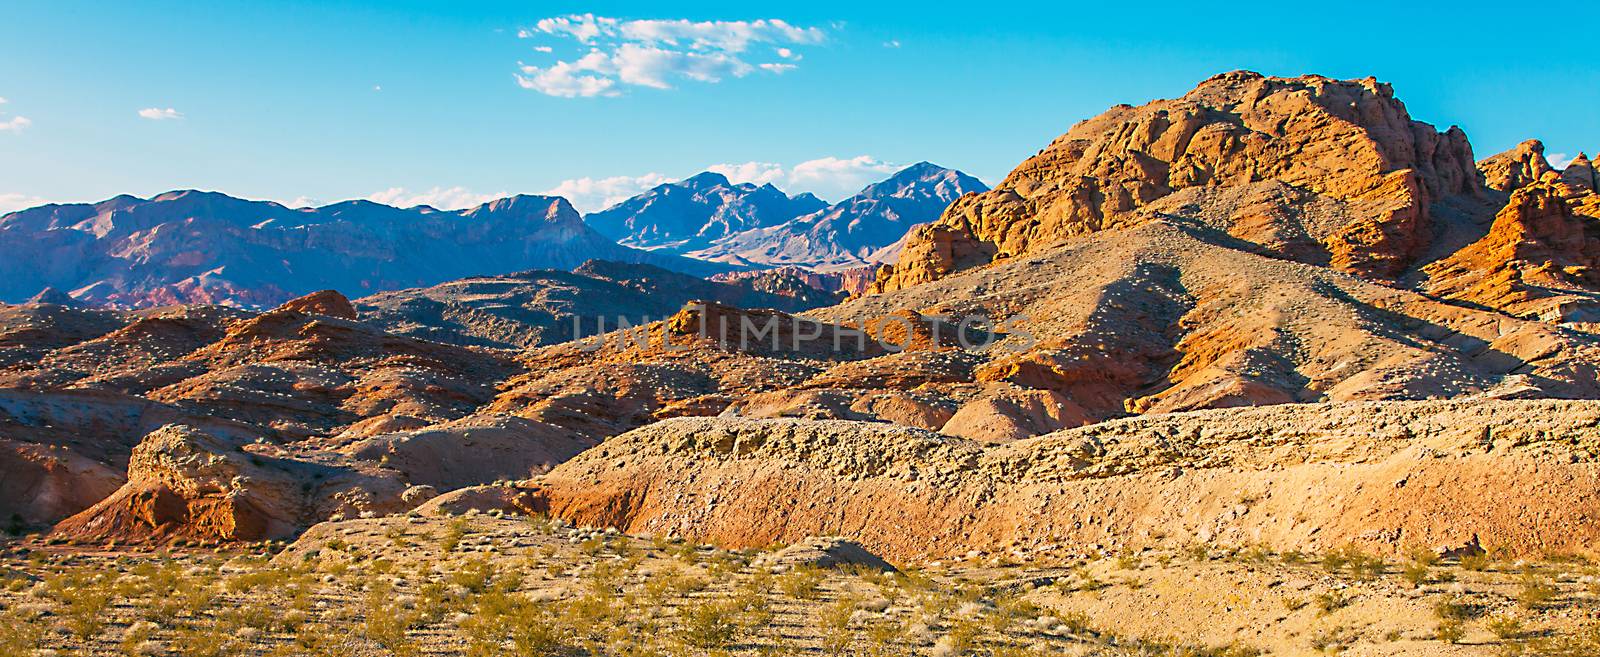 Lake Mead National Recreation Area by Makeral